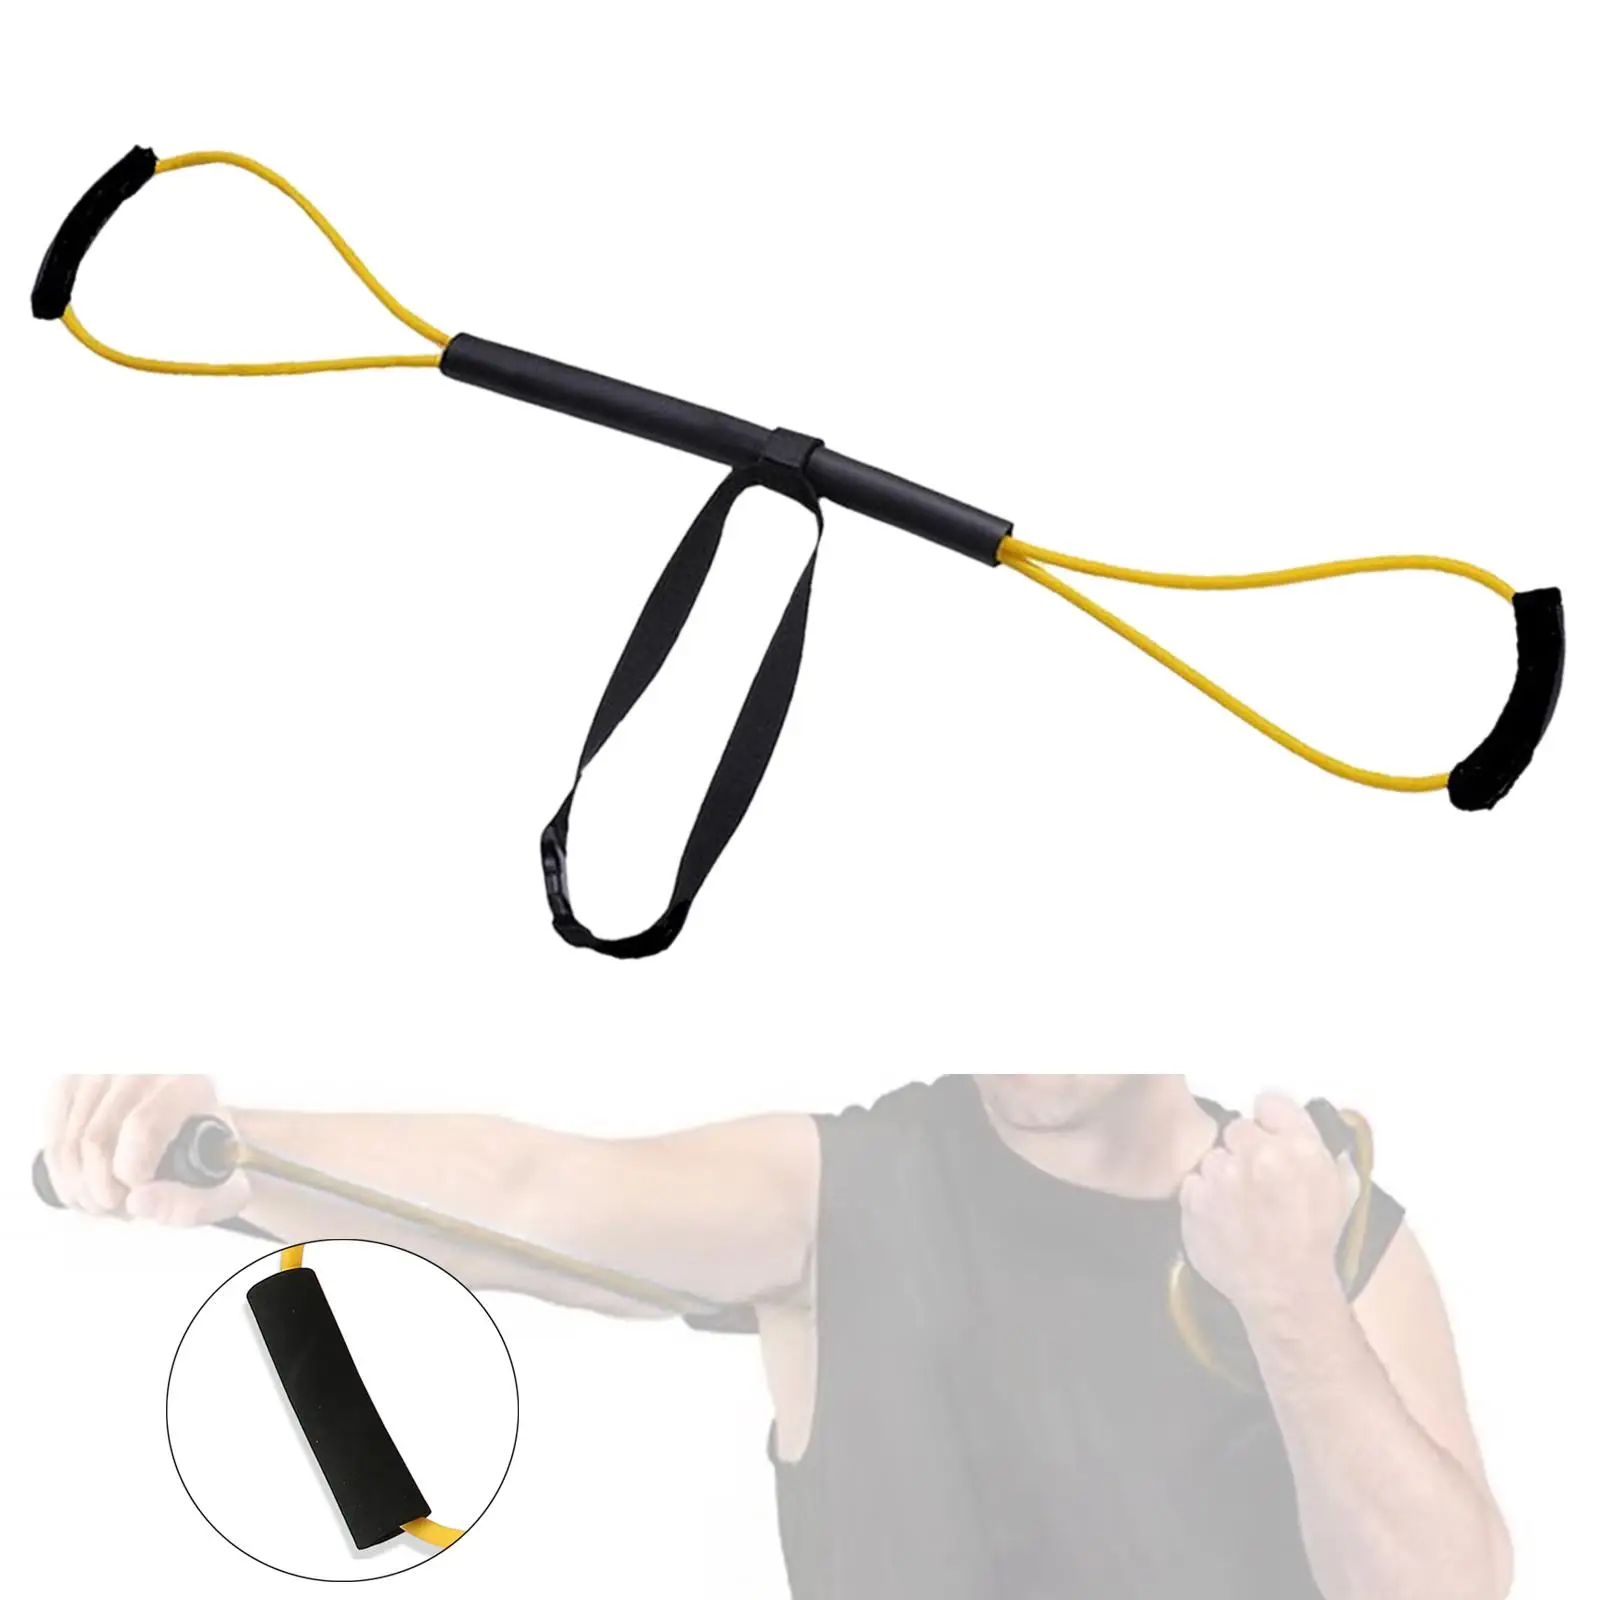 Boxing Resistance Bands Exercise Bands for Home Gym Exercise Equipment Boxing